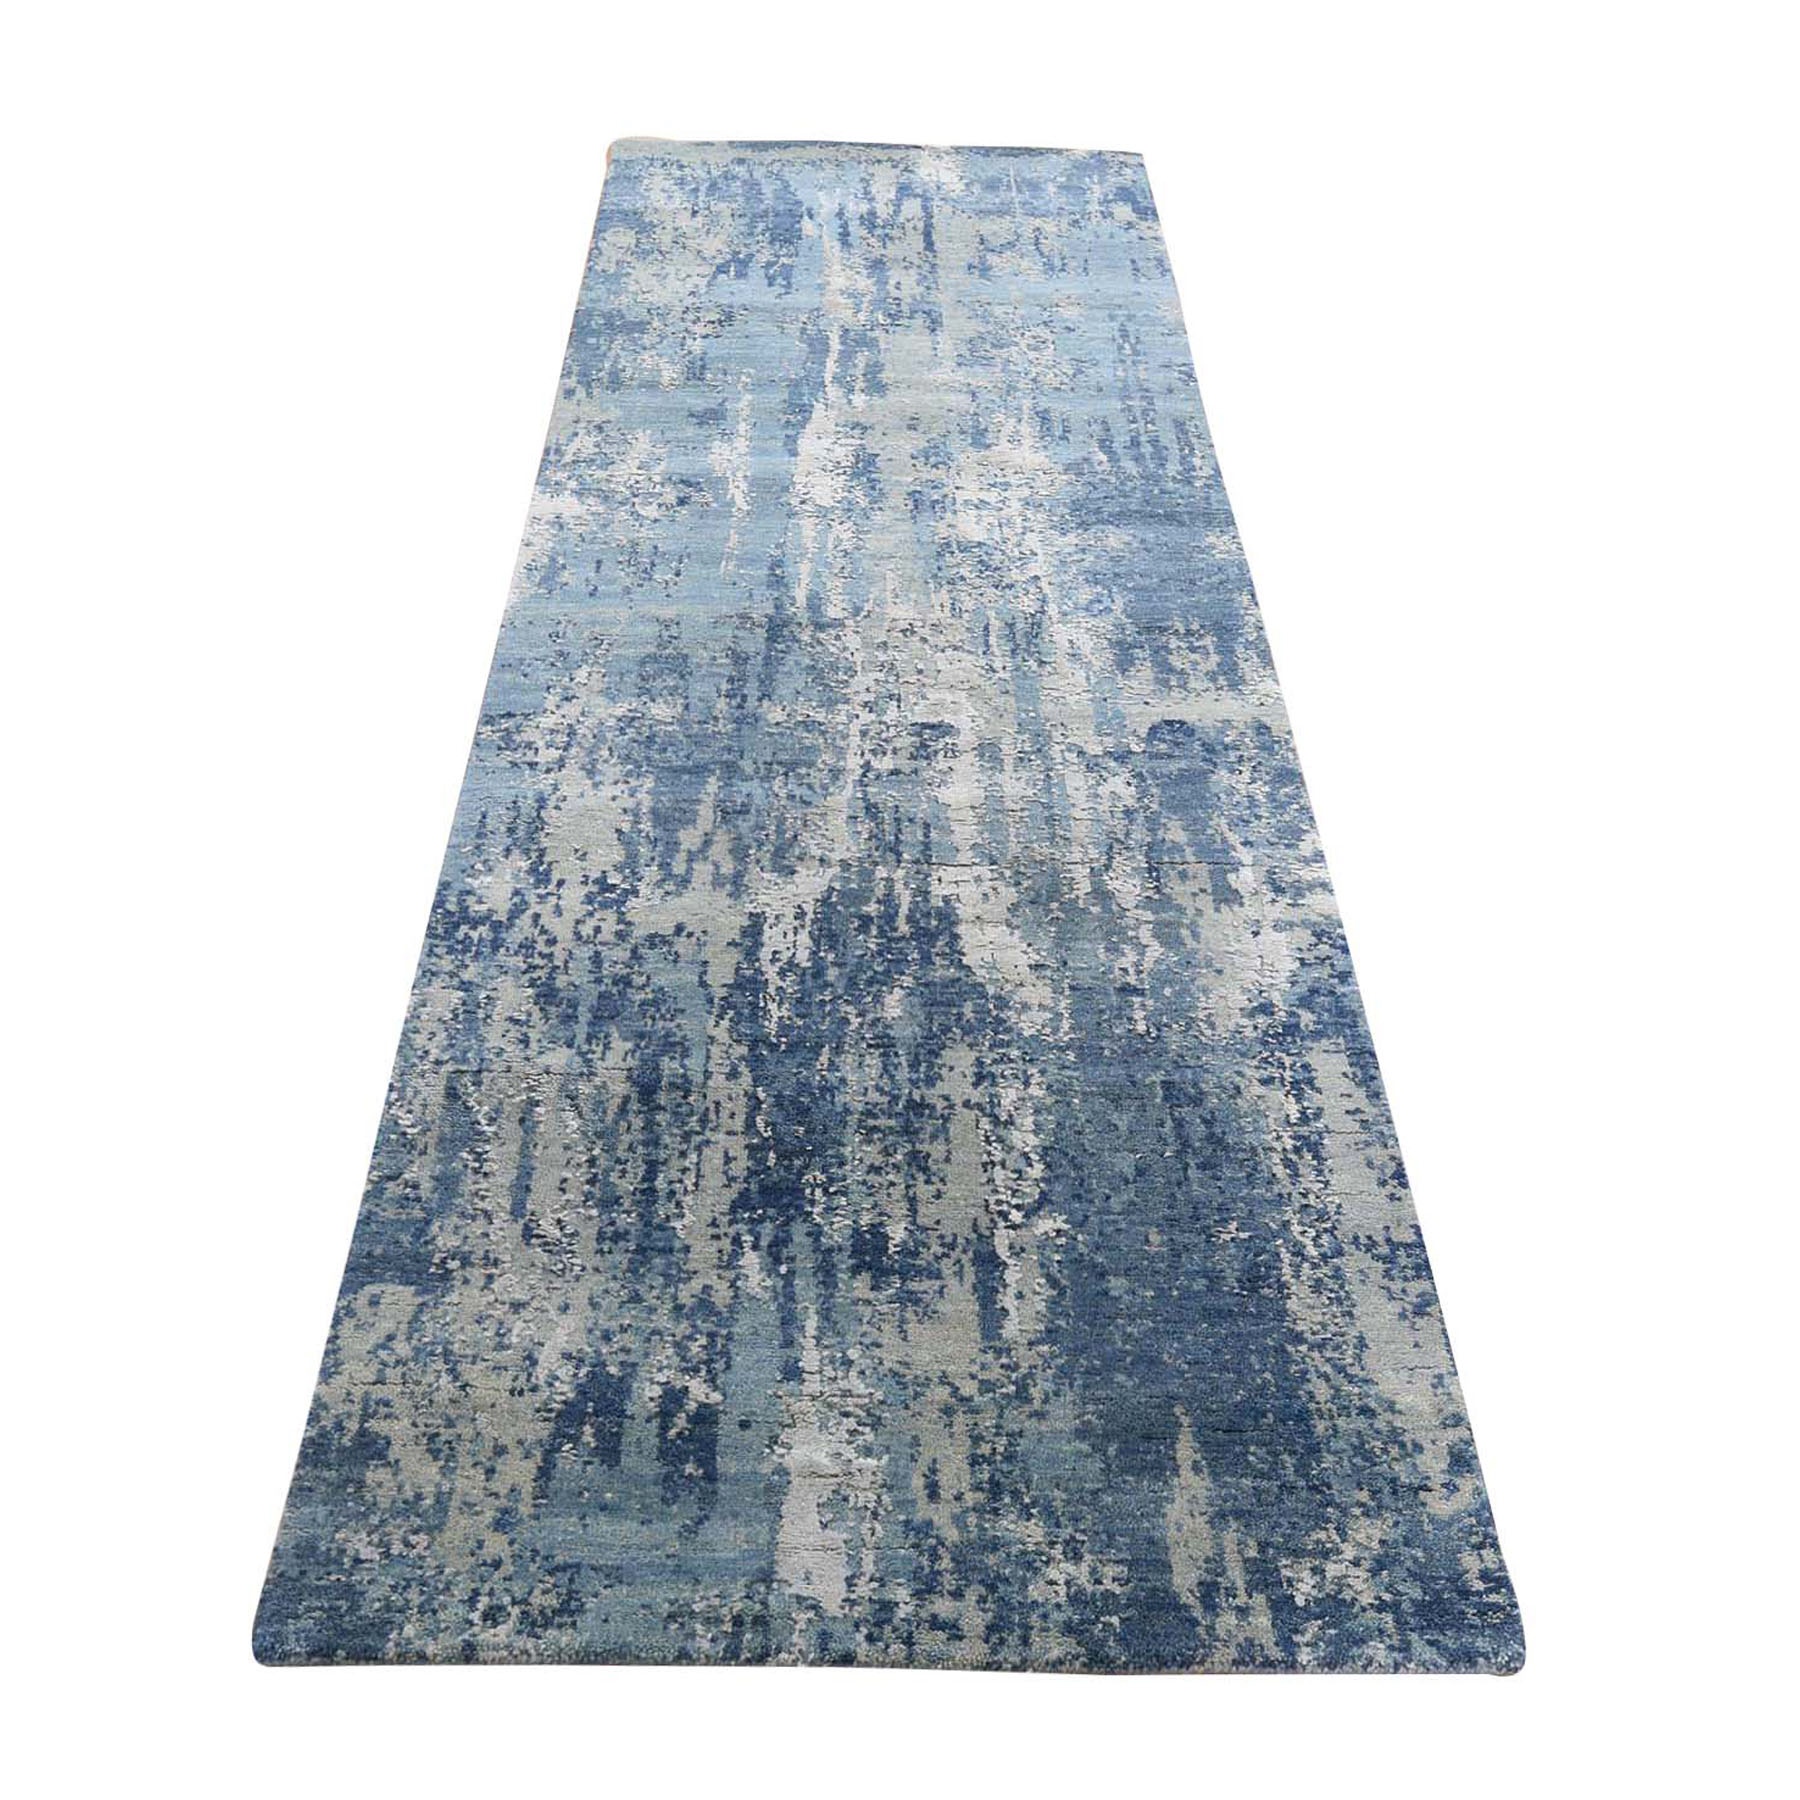 2'6"x8'3" Blue Abstract Design Wool And Pure Silk Hand Woven Runner Oriental Rug 